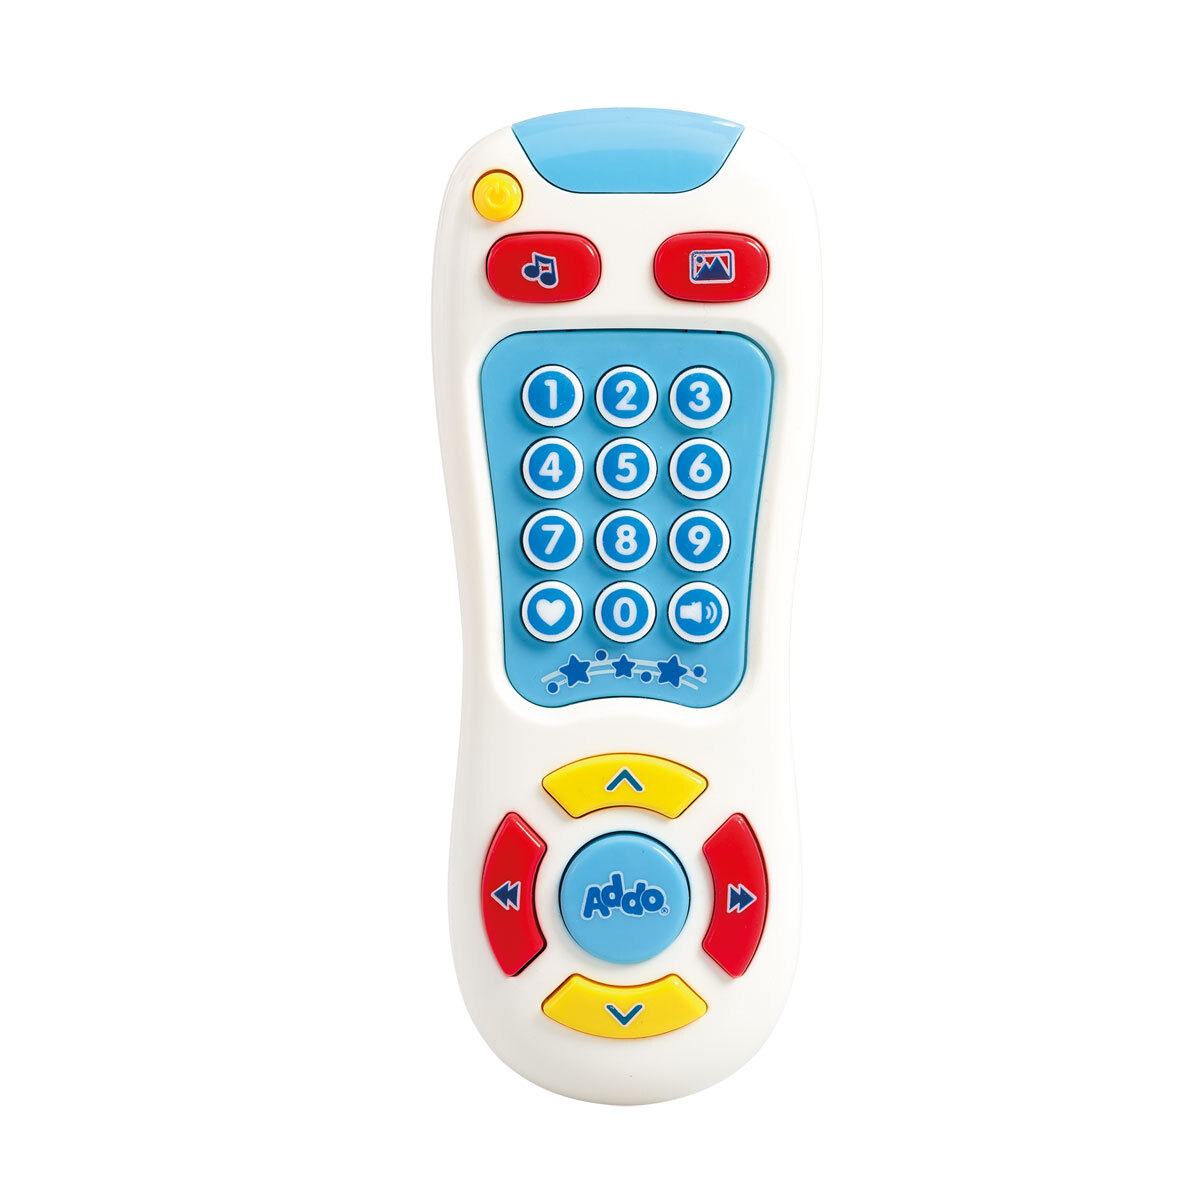 first tv remote control